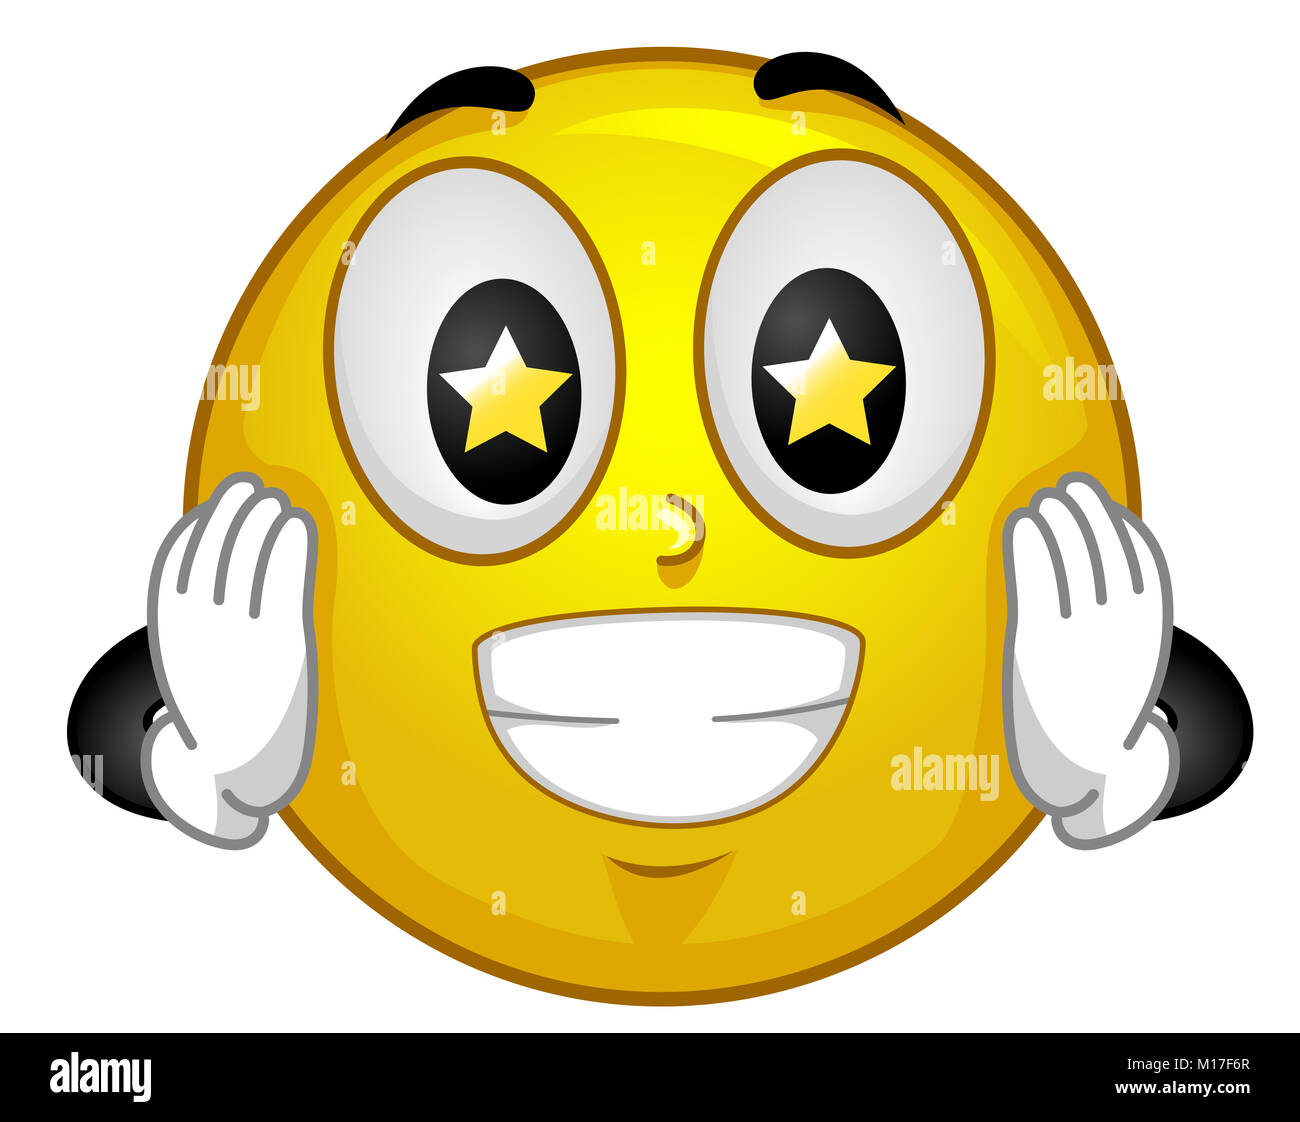 Illustration of a Smiley Mascot with Stars in Its Eyes. Starry Eyes Stock Photo